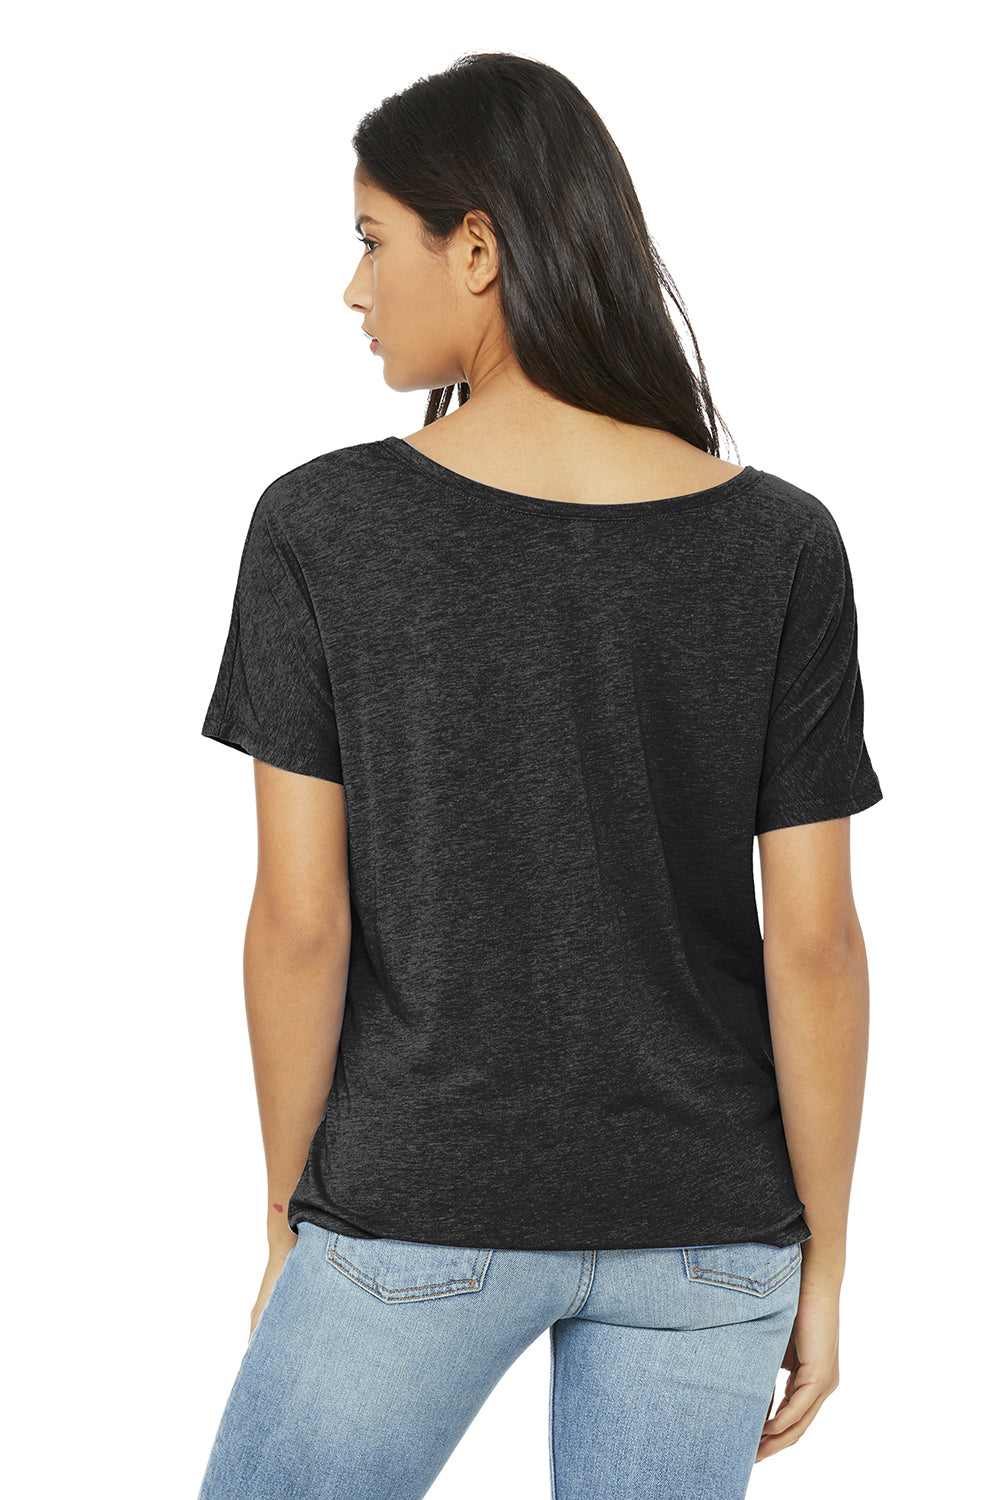 Bella + Canvas BC8816/8816 Womens Slouchy Short Sleeve Wide Neck T-Shirt Charcoal Black Triblend Model Back